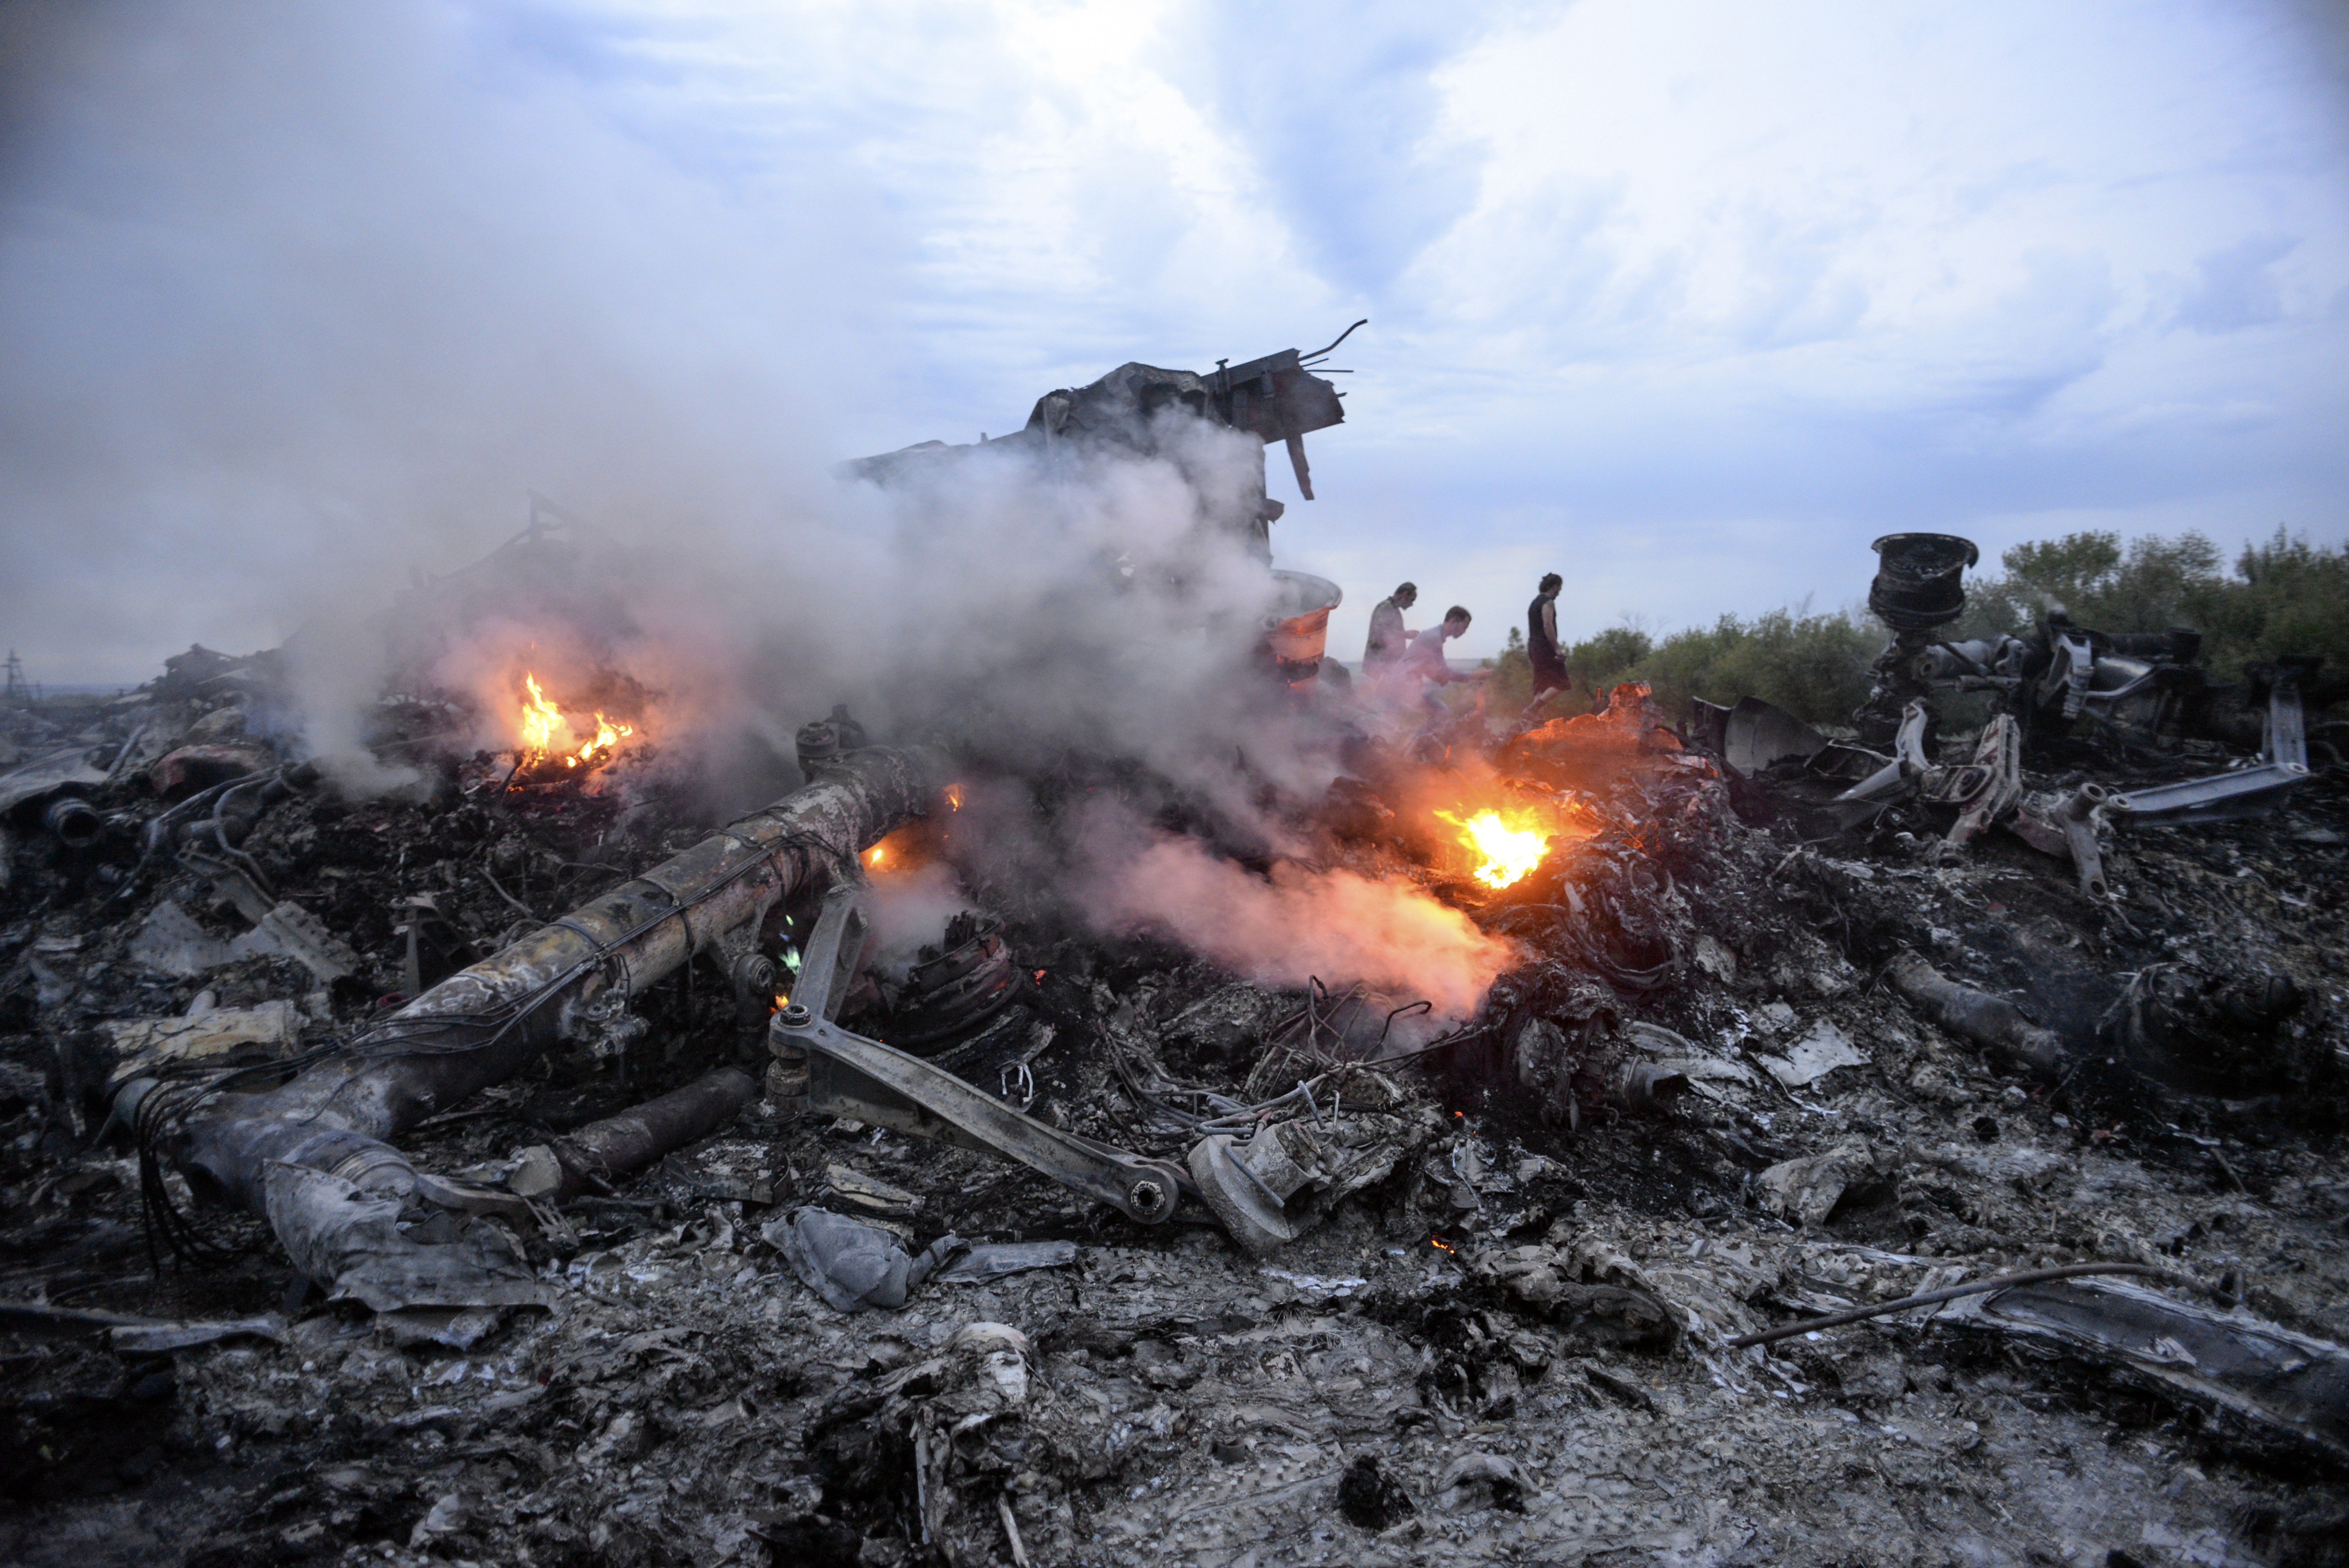 The remains of Malaysia Airlines flight 17 after it crashed while flying over eastern Ukraine. Photo: EPA